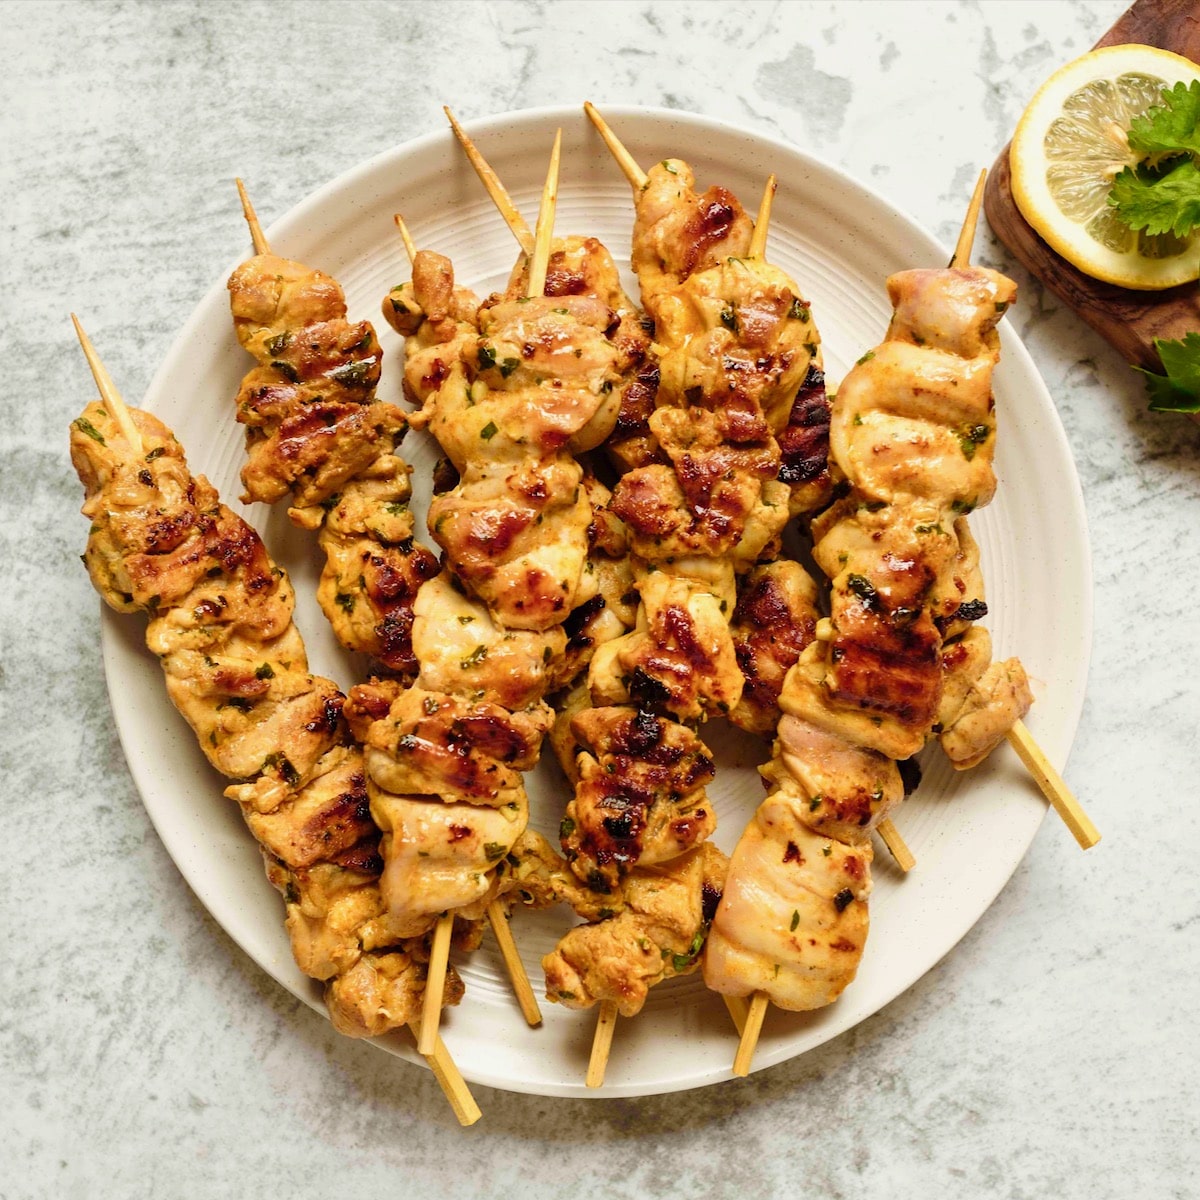 Overhead square shot - plate of Lemony Marinated Chicken Skewers on countertop, lemon and parsley garnish on wooden cutting board beside the plate.